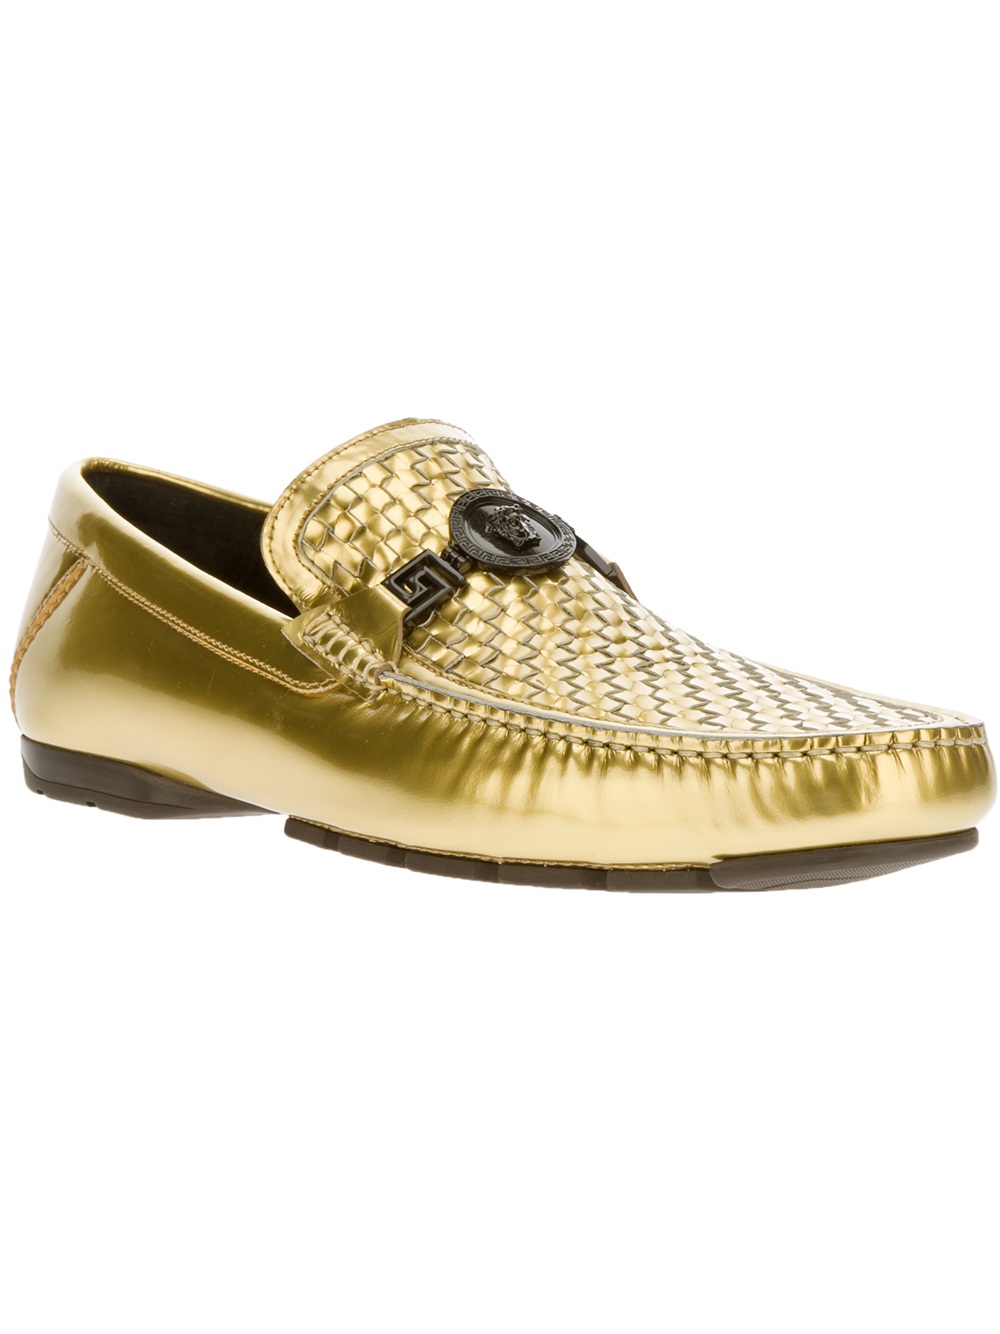 Lyst versace  Shoe in Gold for shoes  Woven Versace Car Men  for mens